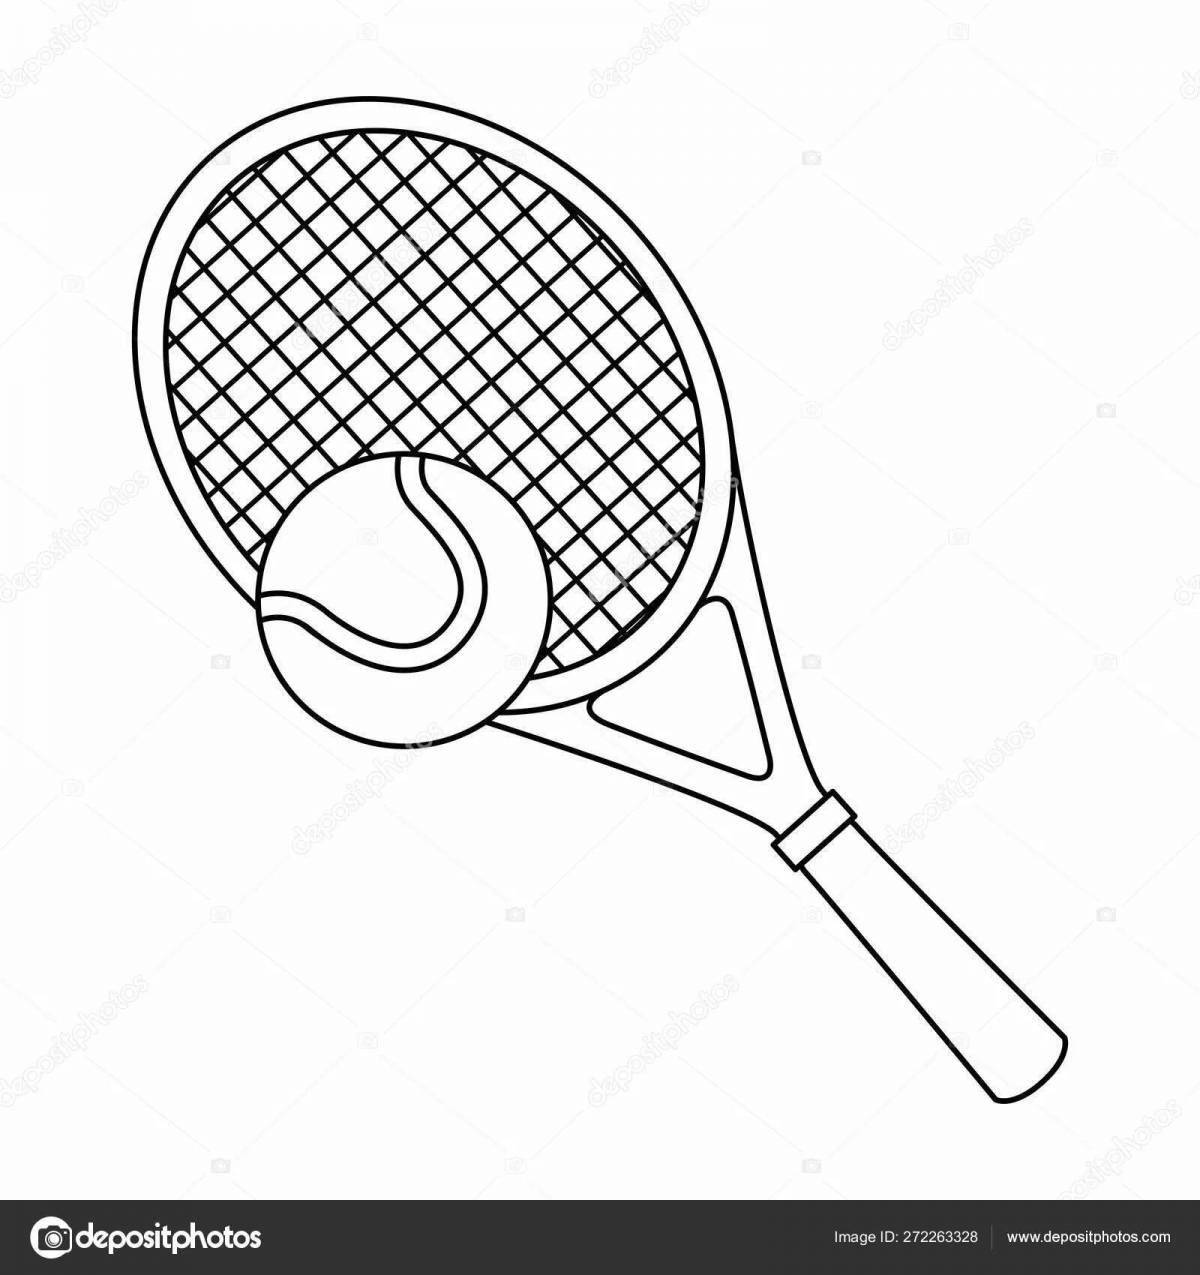 Coloring page funny tennis racket